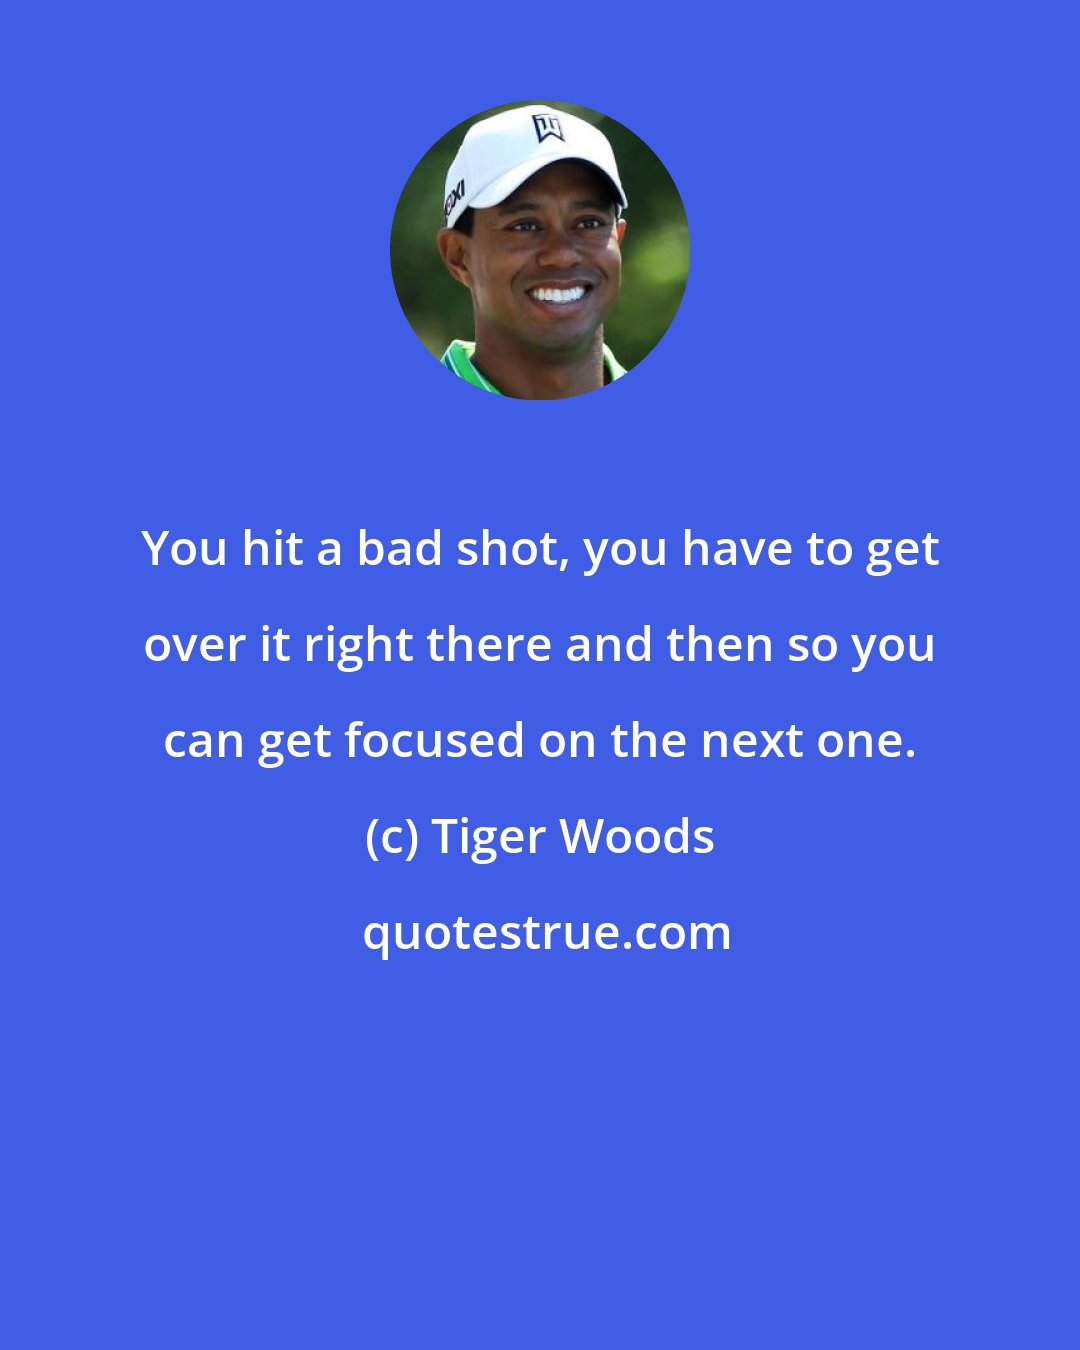 Tiger Woods: You hit a bad shot, you have to get over it right there and then so you can get focused on the next one.